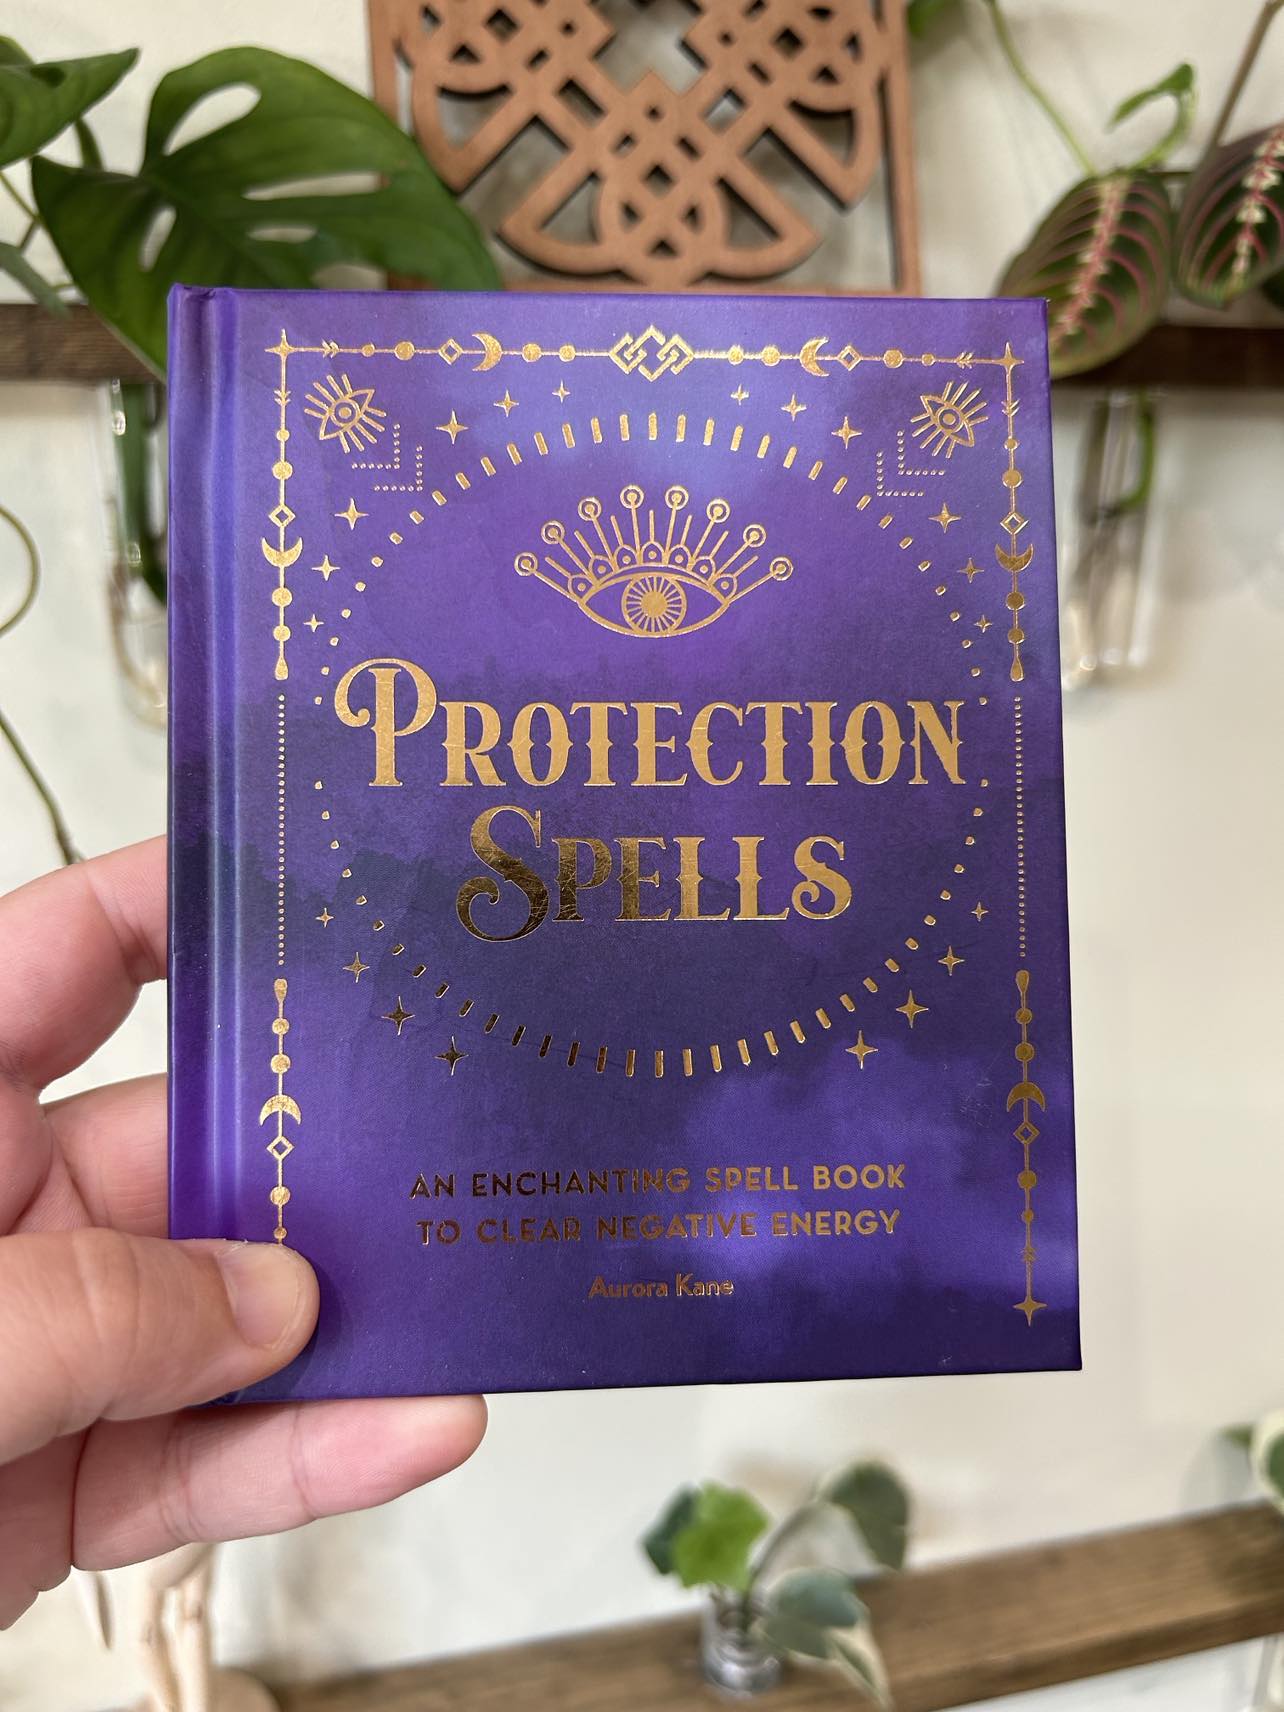 Protection spells